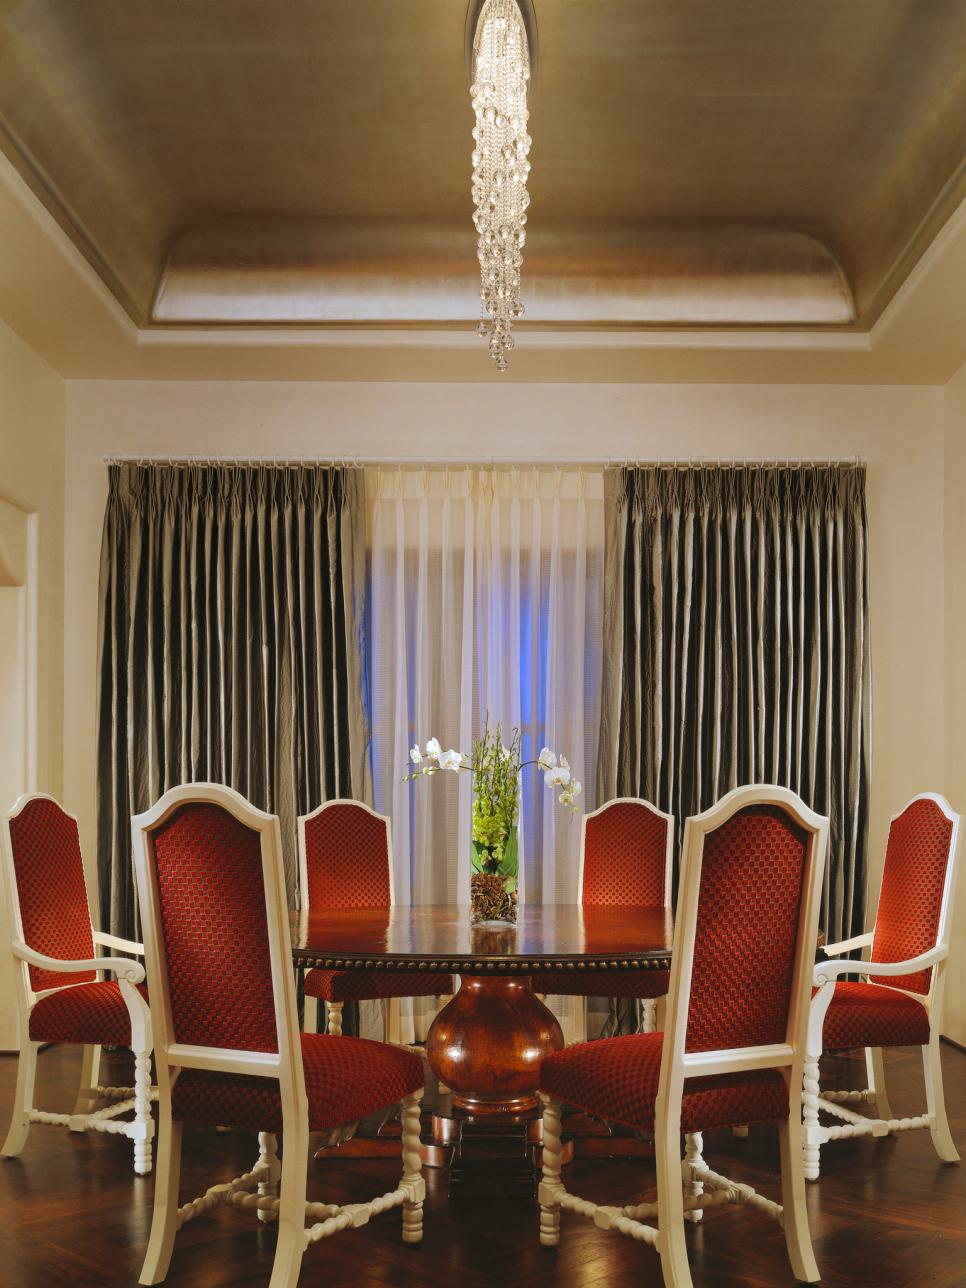 Dining Room With Traditional Round Dining Table and Red Chairs